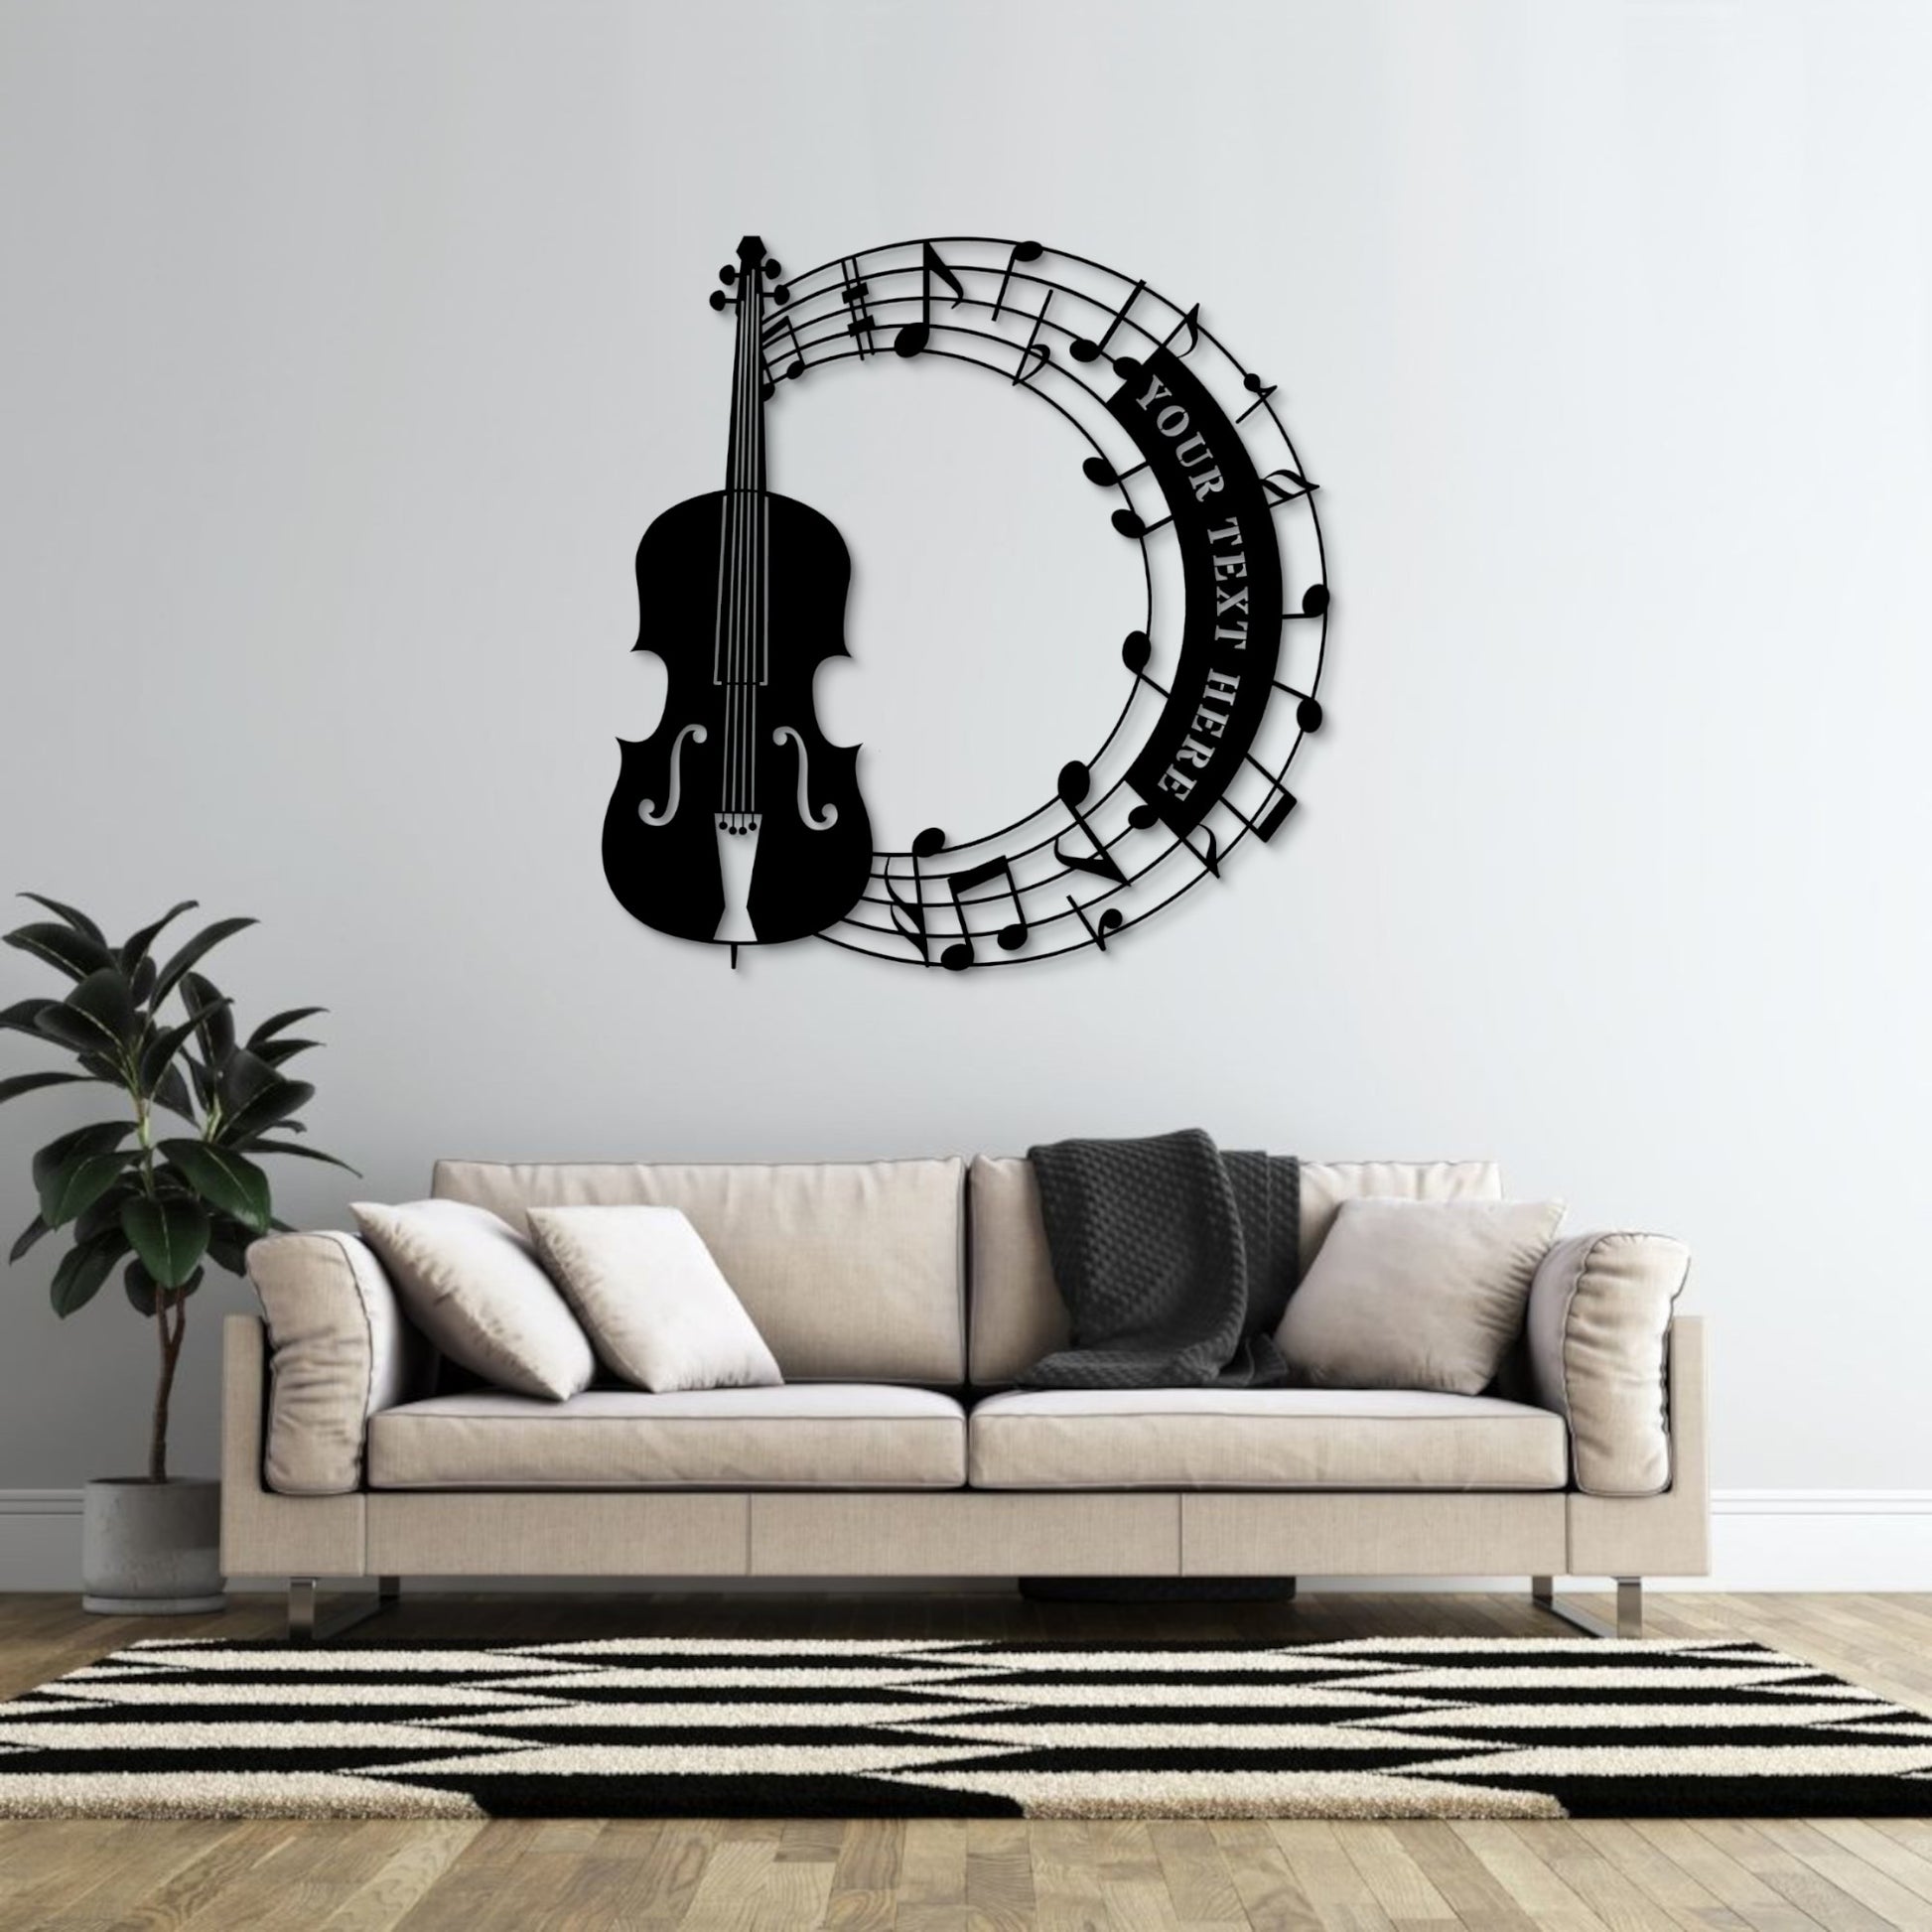 Personalized Cello And Notes Name Metal Sign. Custom Cellist Wall Decor Gift. Musician Entertainer. Music Room Display. Musical Wall Hanging